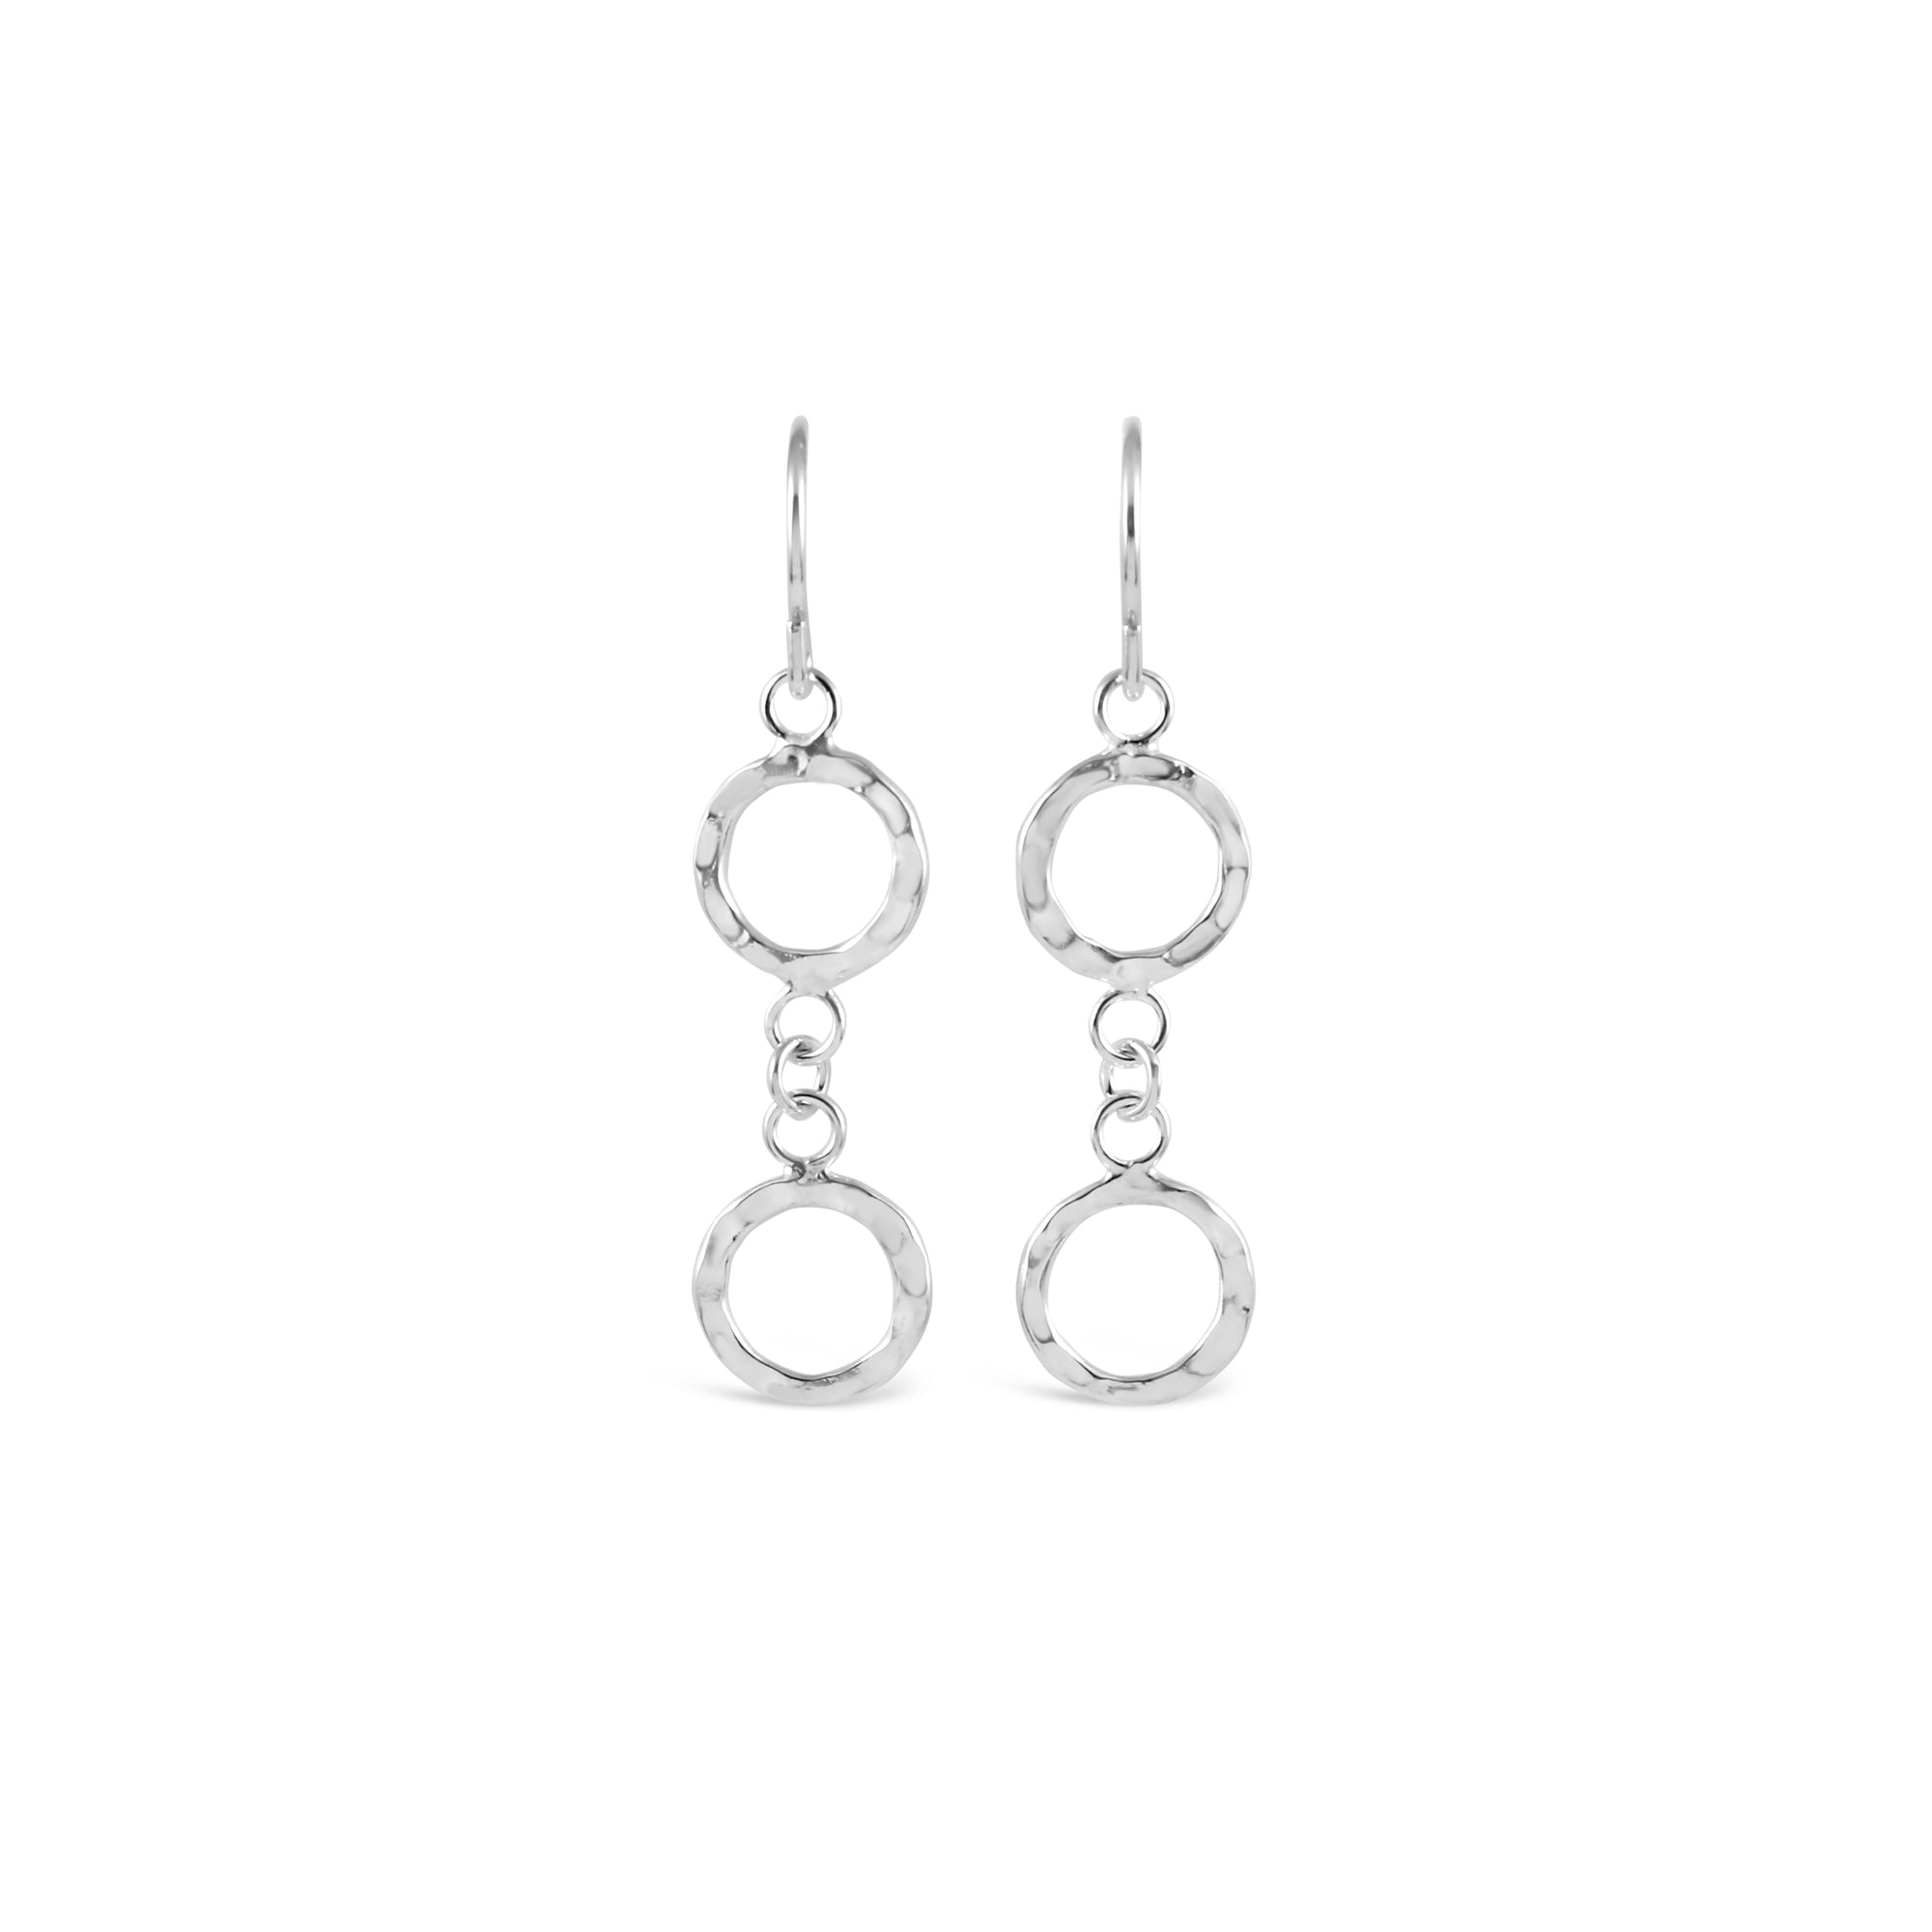 Contemporary Hammered Silver Double Ring Earrings